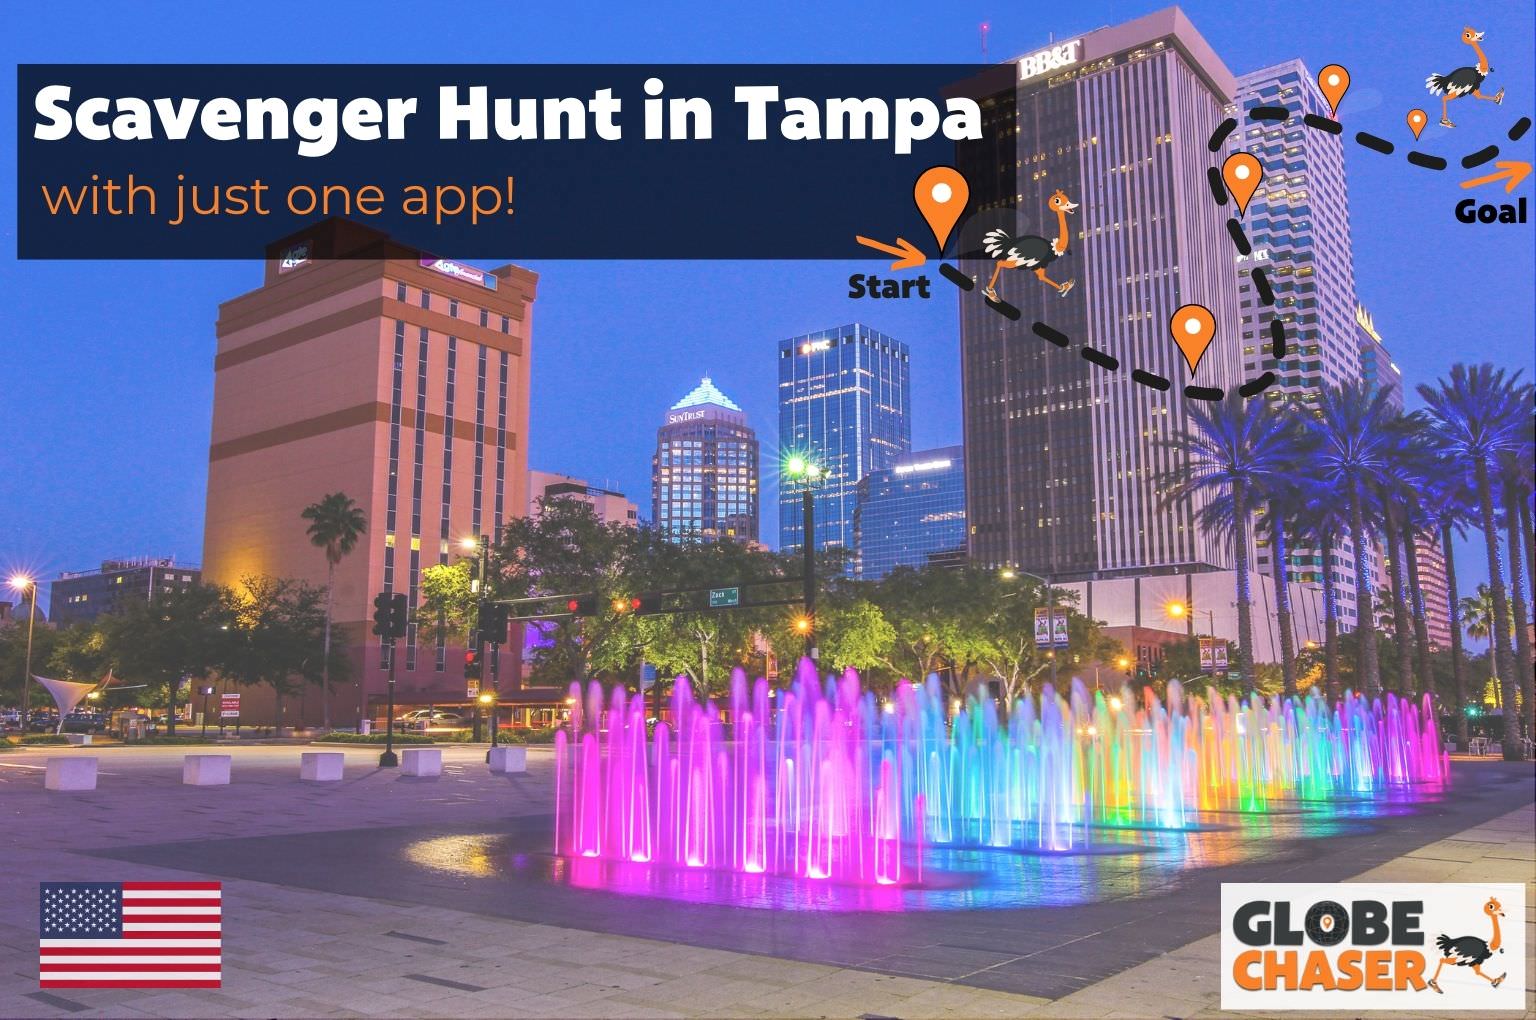 Scavenger Hunt in Tampa, USA - Family Activities with the Globe Chaser App for Outdoor Fun